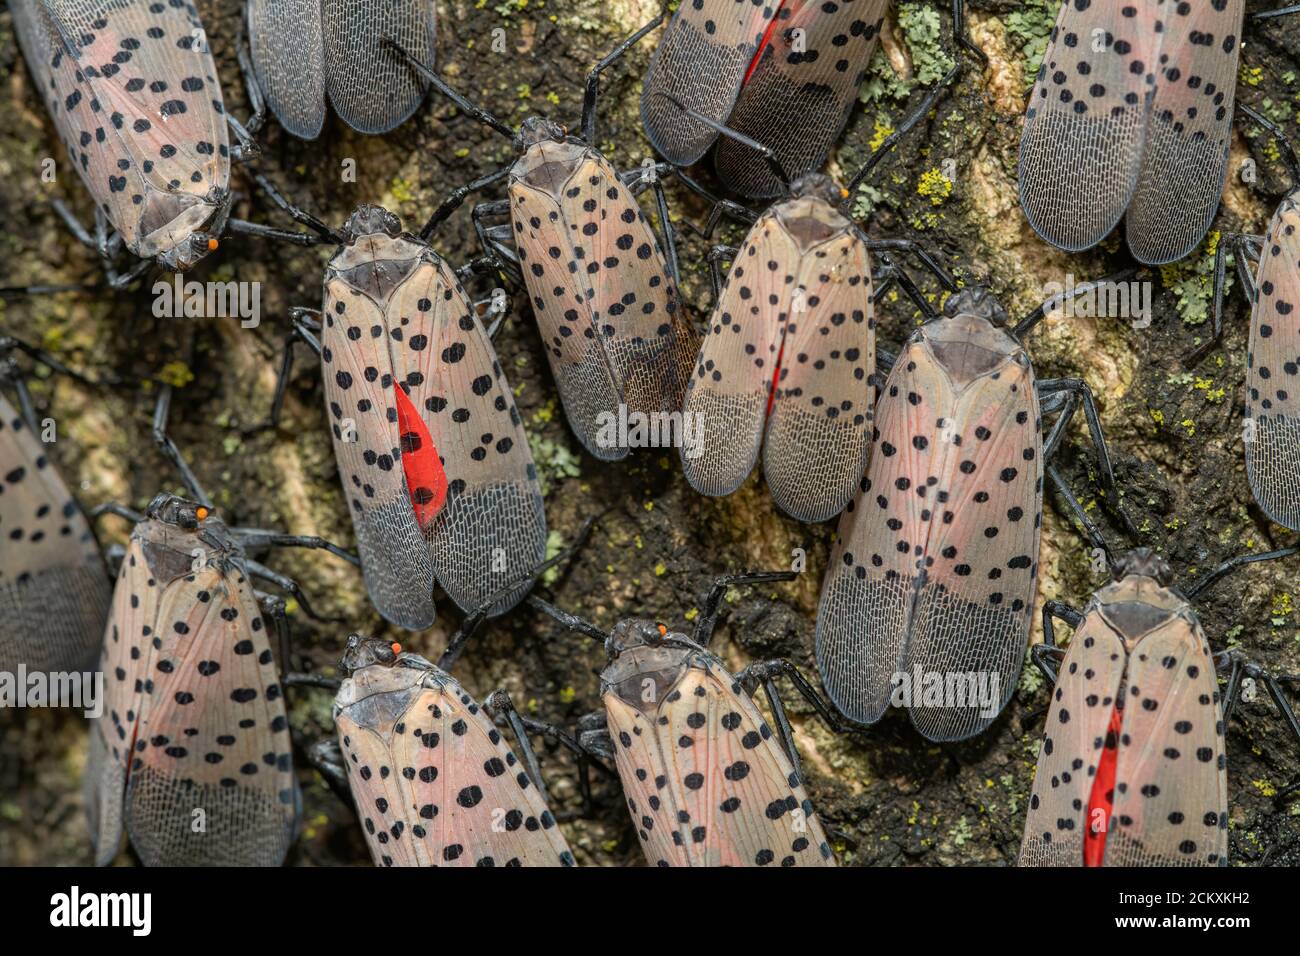 LARGE GROUPING OF SPOTTED LANTERNFLIES (LYCORMA DELICATULA) ON A TREE IN PHILADELPHIA PENNSYLVANIA Stock Photo